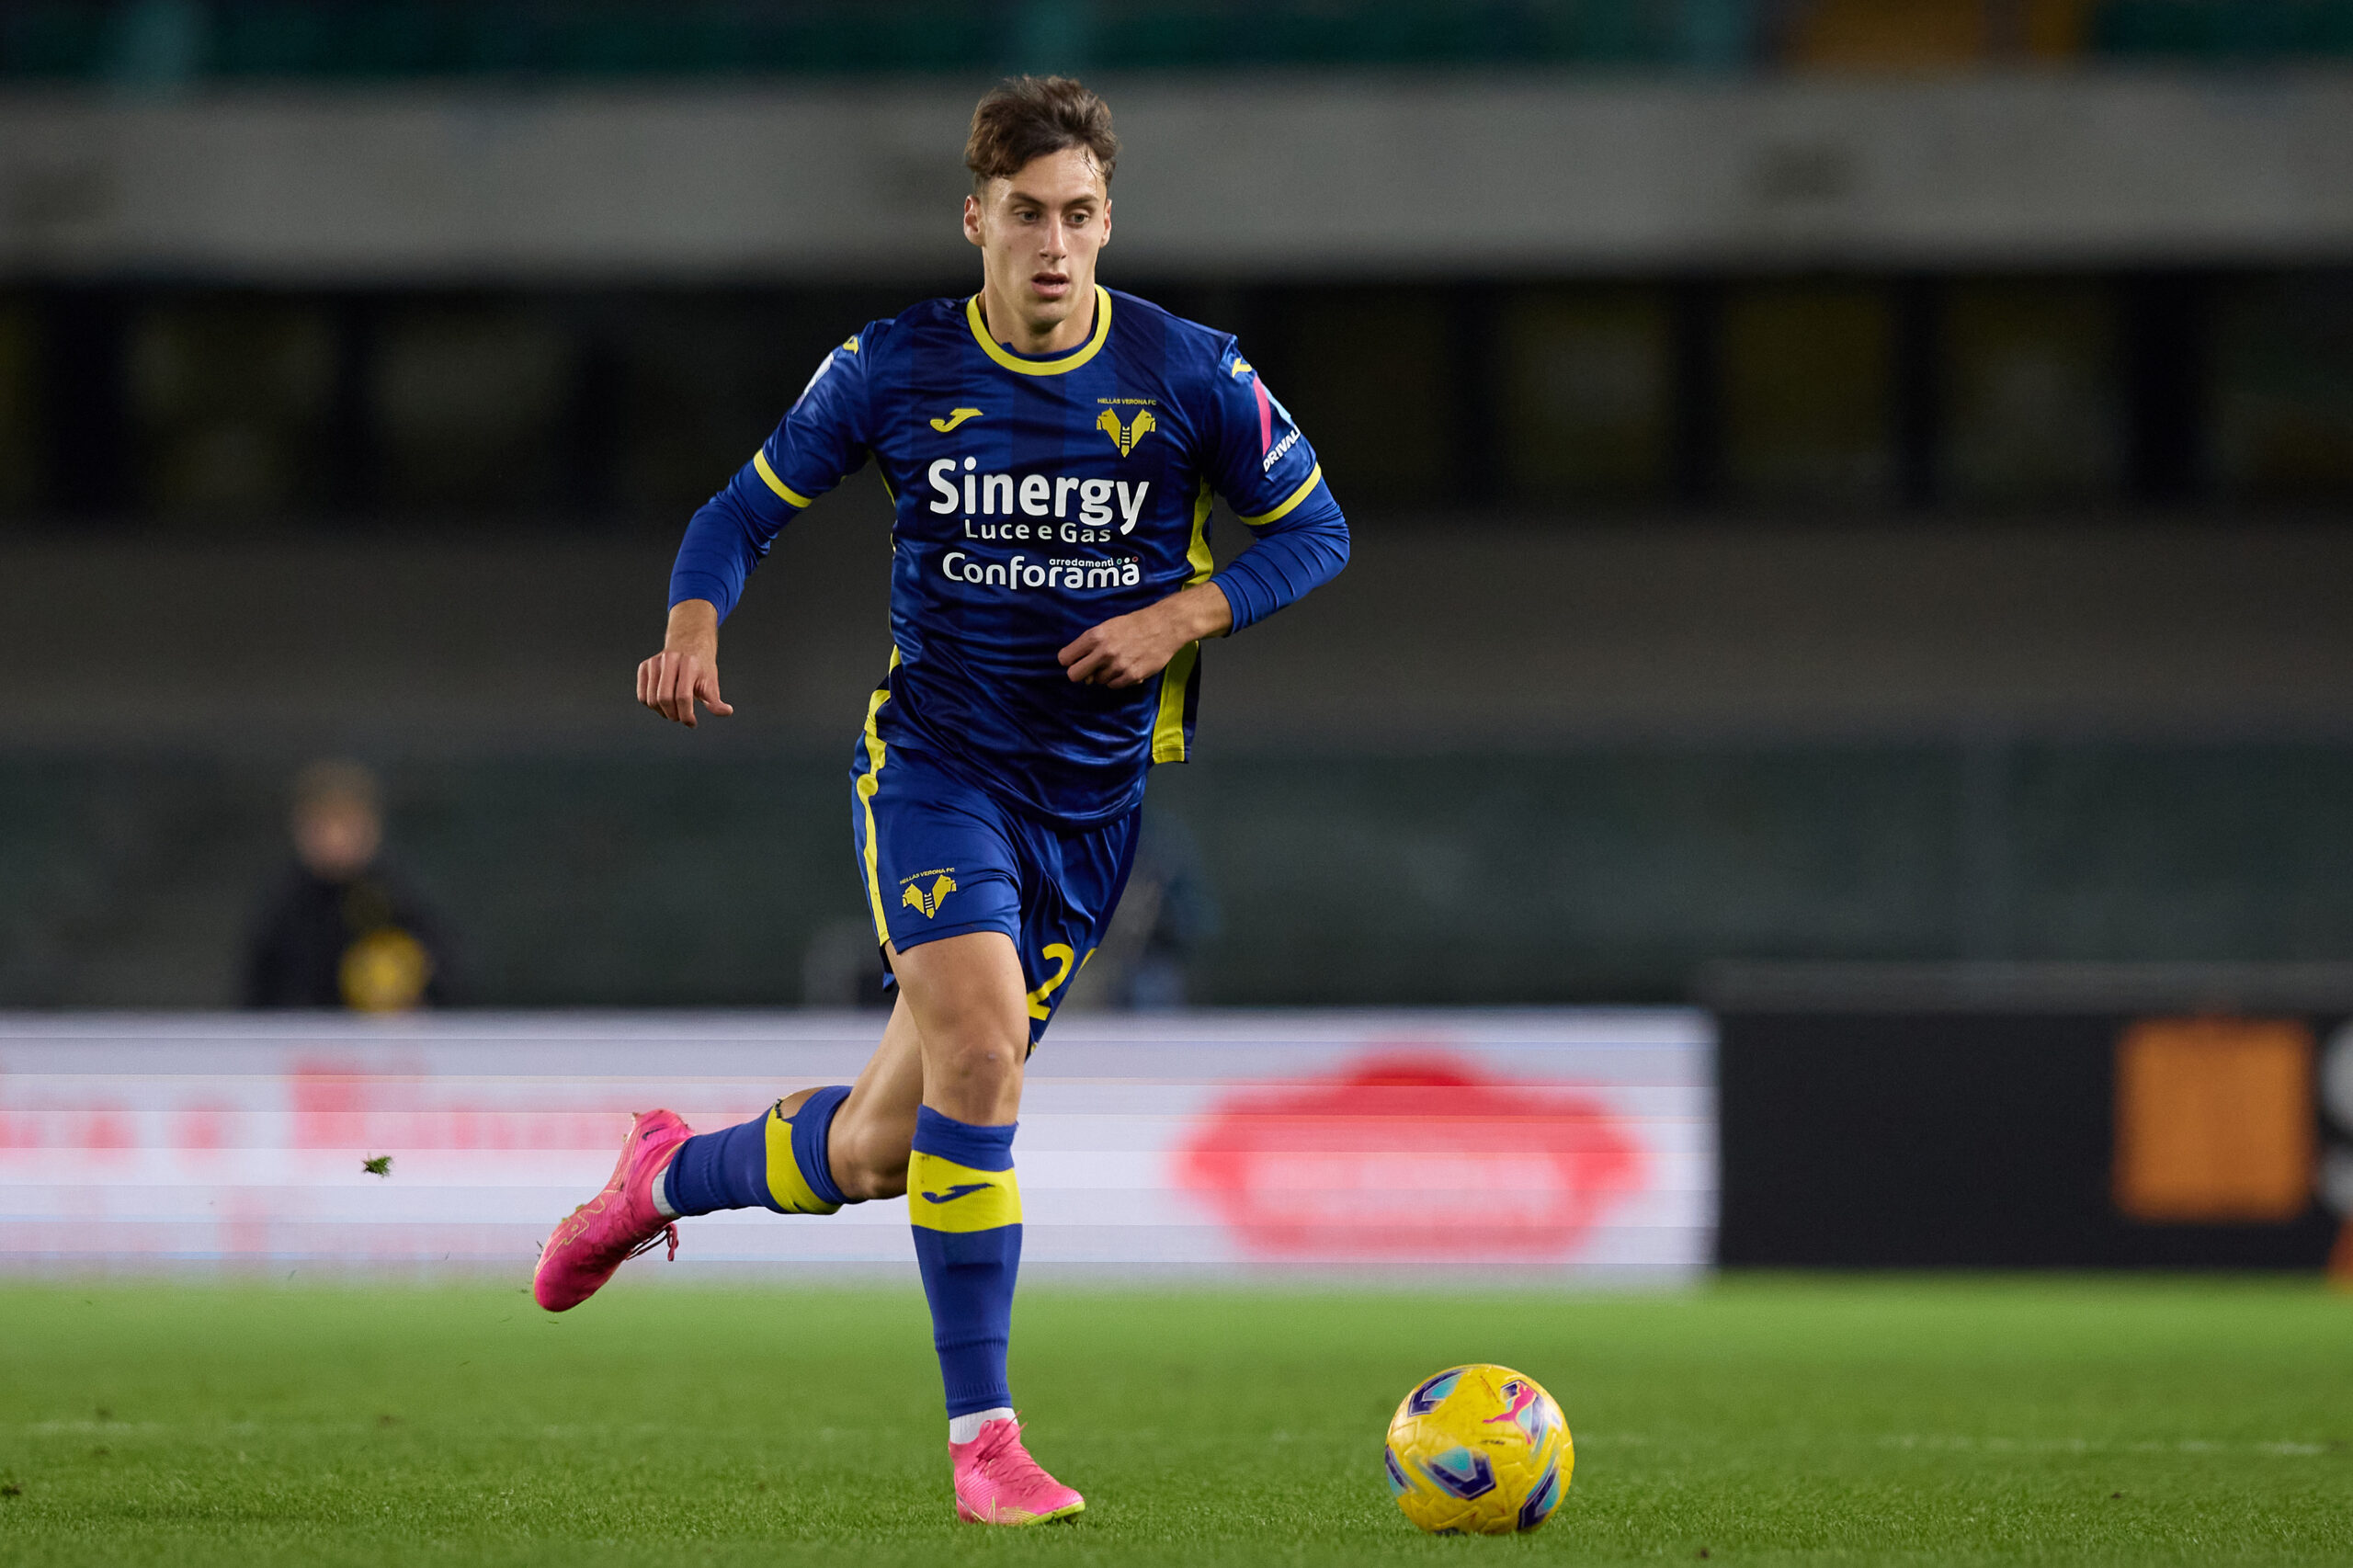 Milan are about to complete their second winter signing, as Filippo Terracciano came in on Sunday night and will take the medicals on Monday.